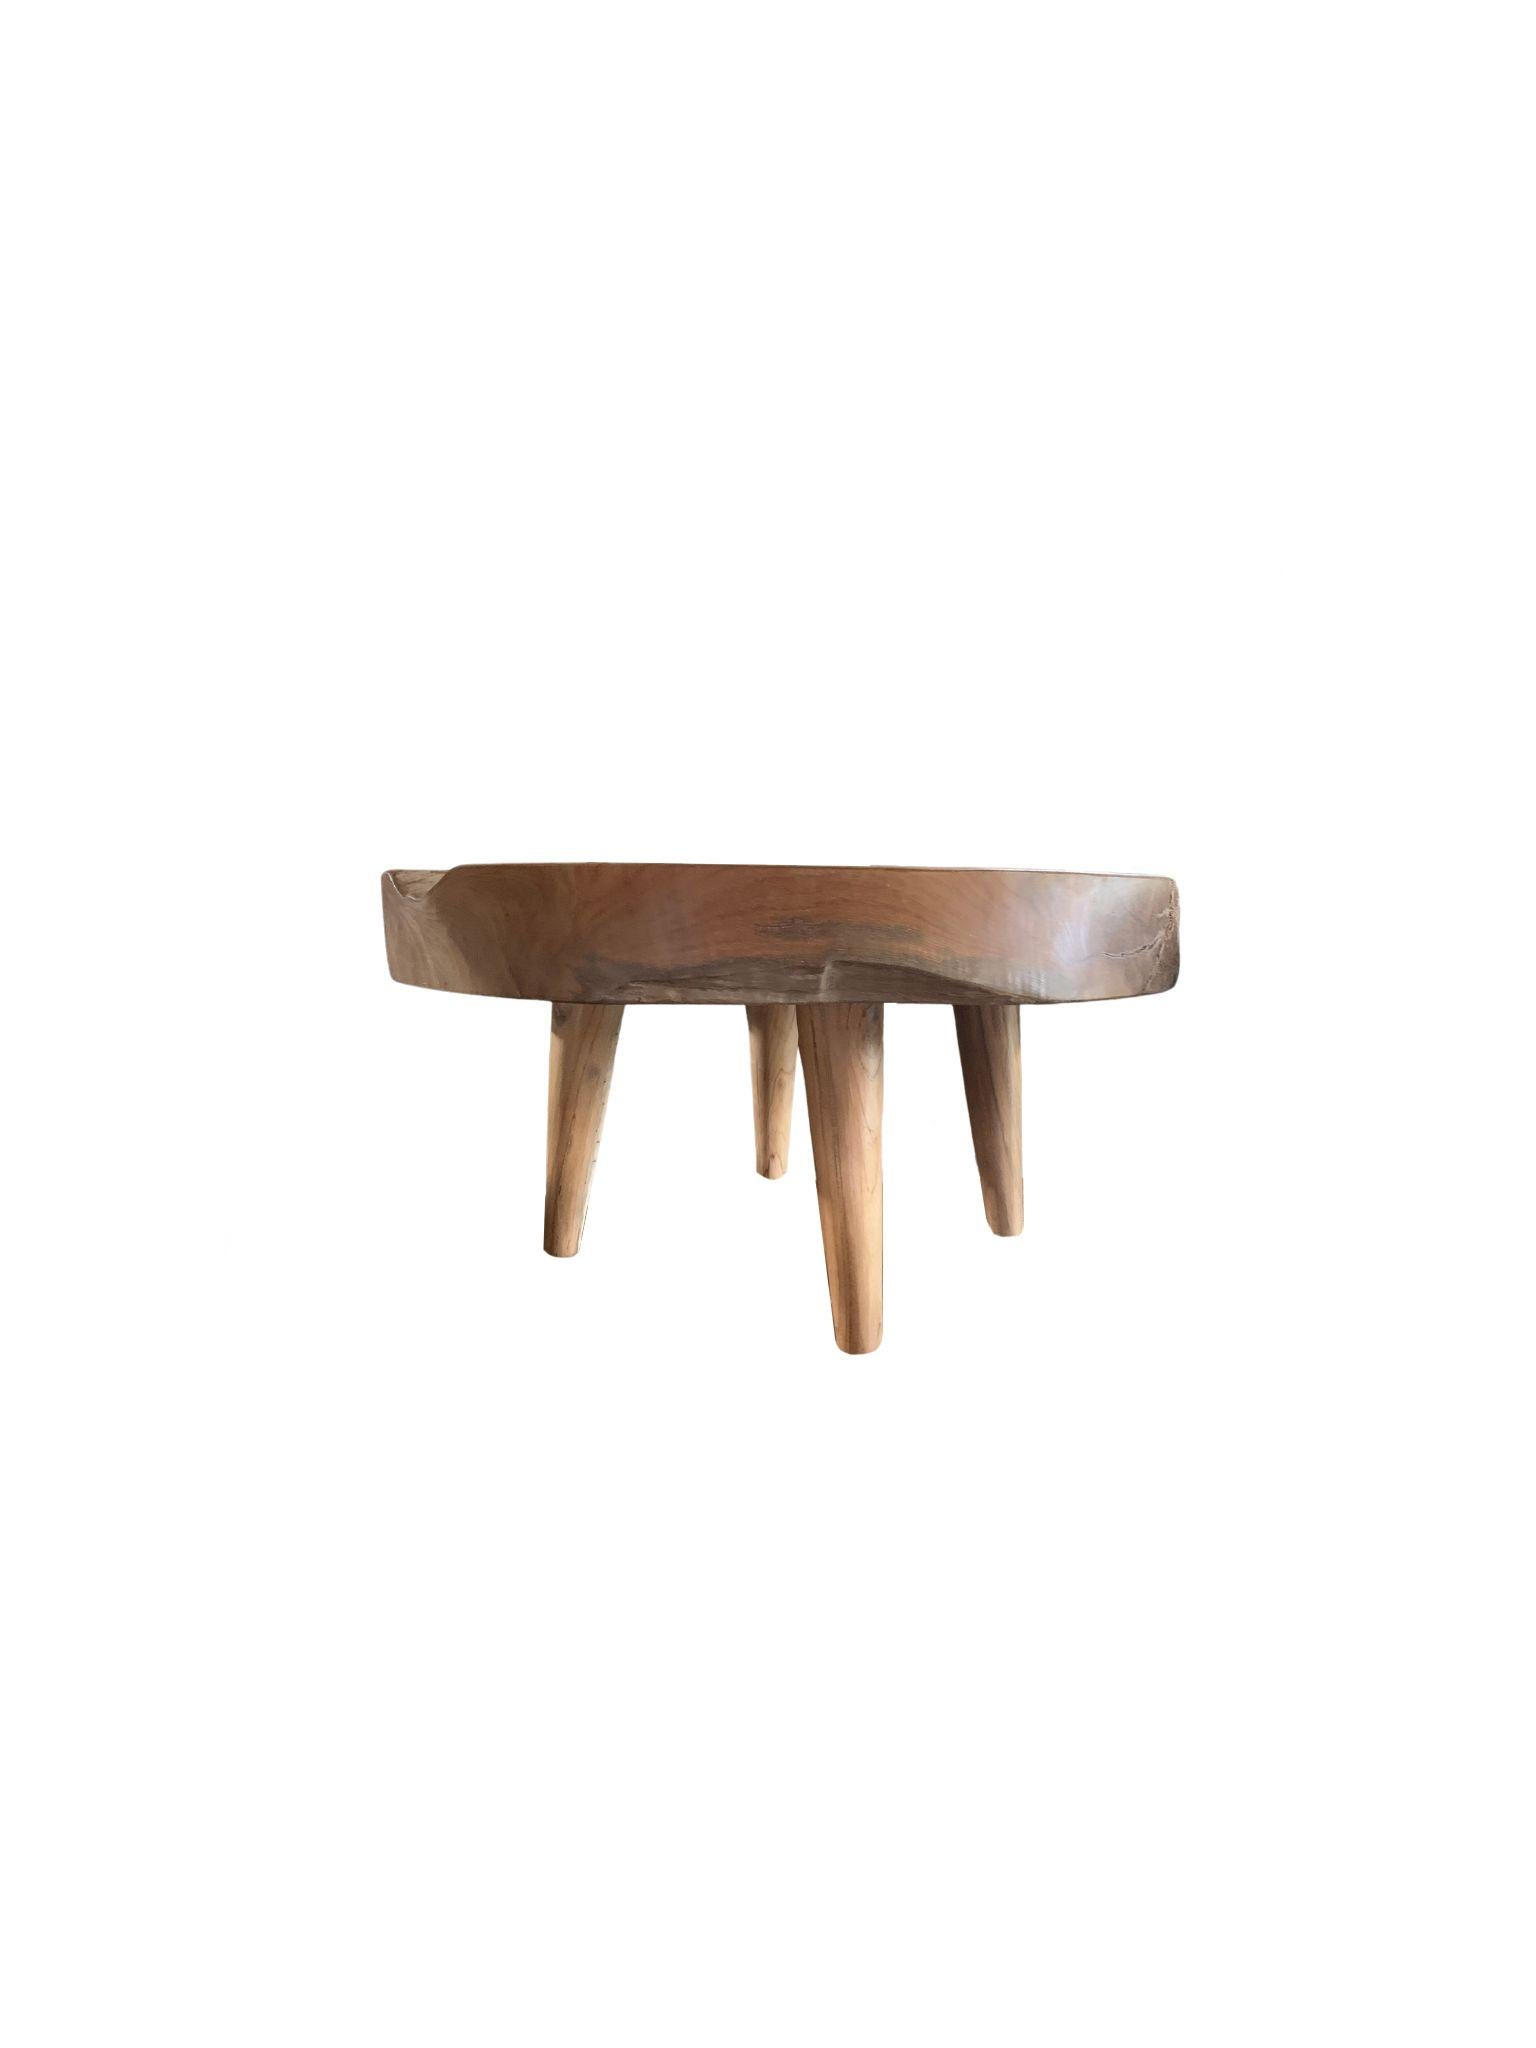 Indonesian Modern Organic Side Table Crafted from Mango Wood For Sale